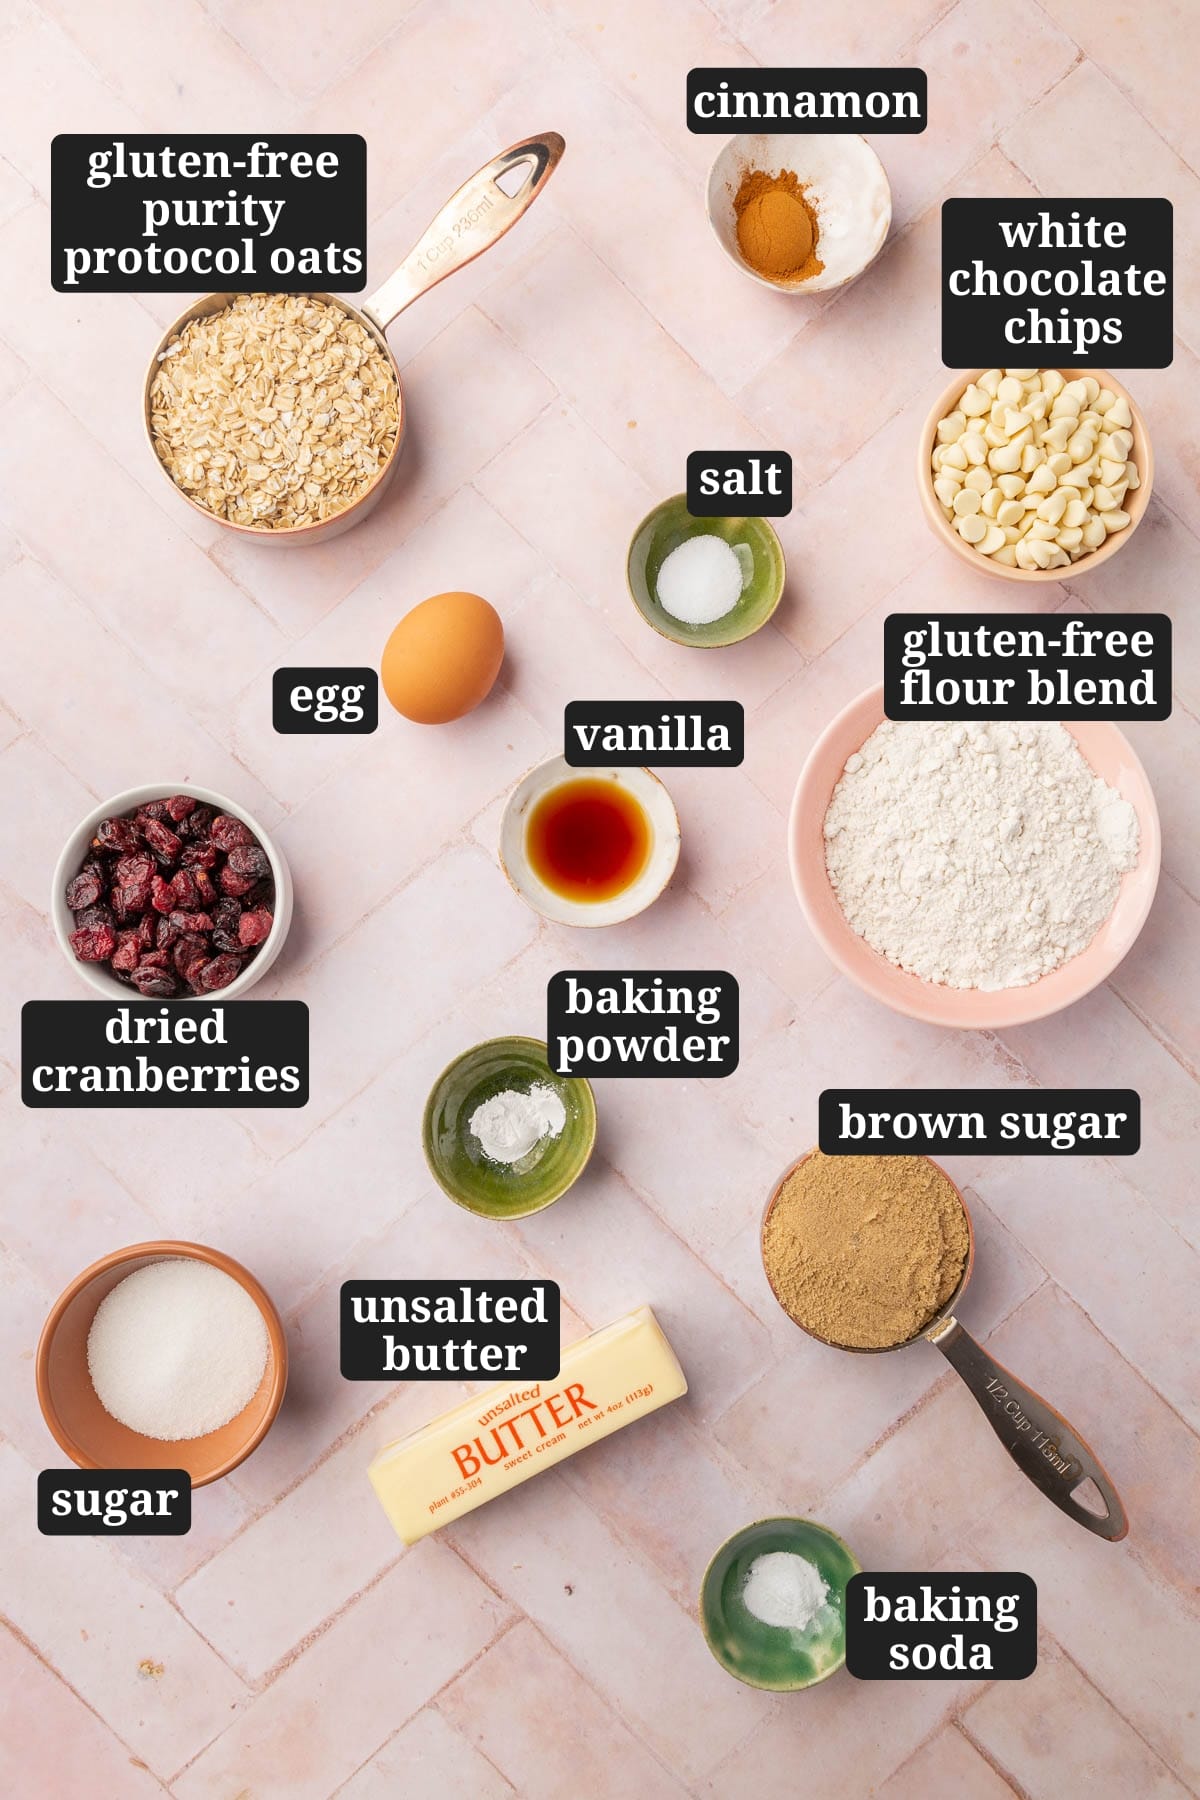 Ingredients in small bowls to make gluten-free oatmeal craisin cookies, including gluten-free oats, cinnamon, salt, white chocolate chips, egg, vanilla, dried cranberries, gluten-free flour, baking powder, granulated sugar, butter, brown sugar and baking soda with text overlays over each ingredient.